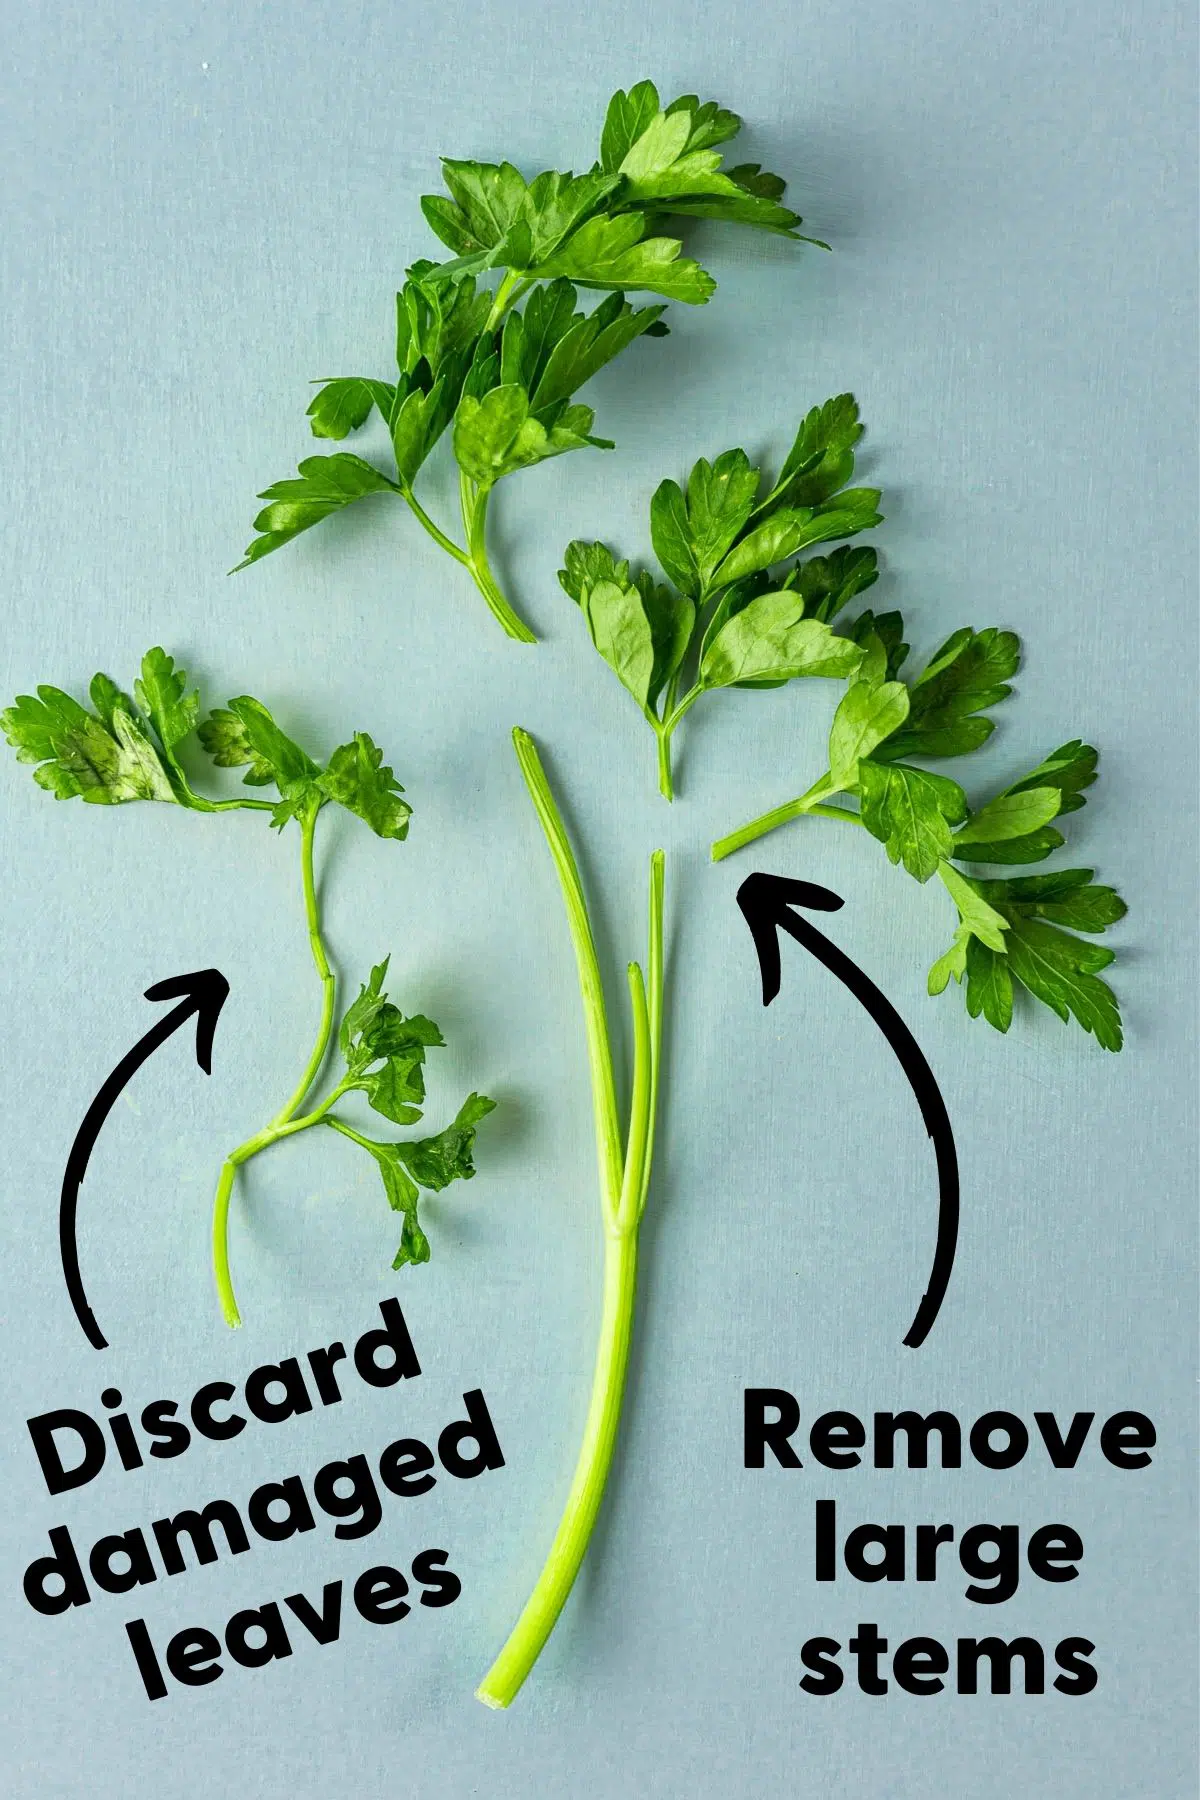 Parsley with text reading "Discard damaged leaves" and "remove large stems"